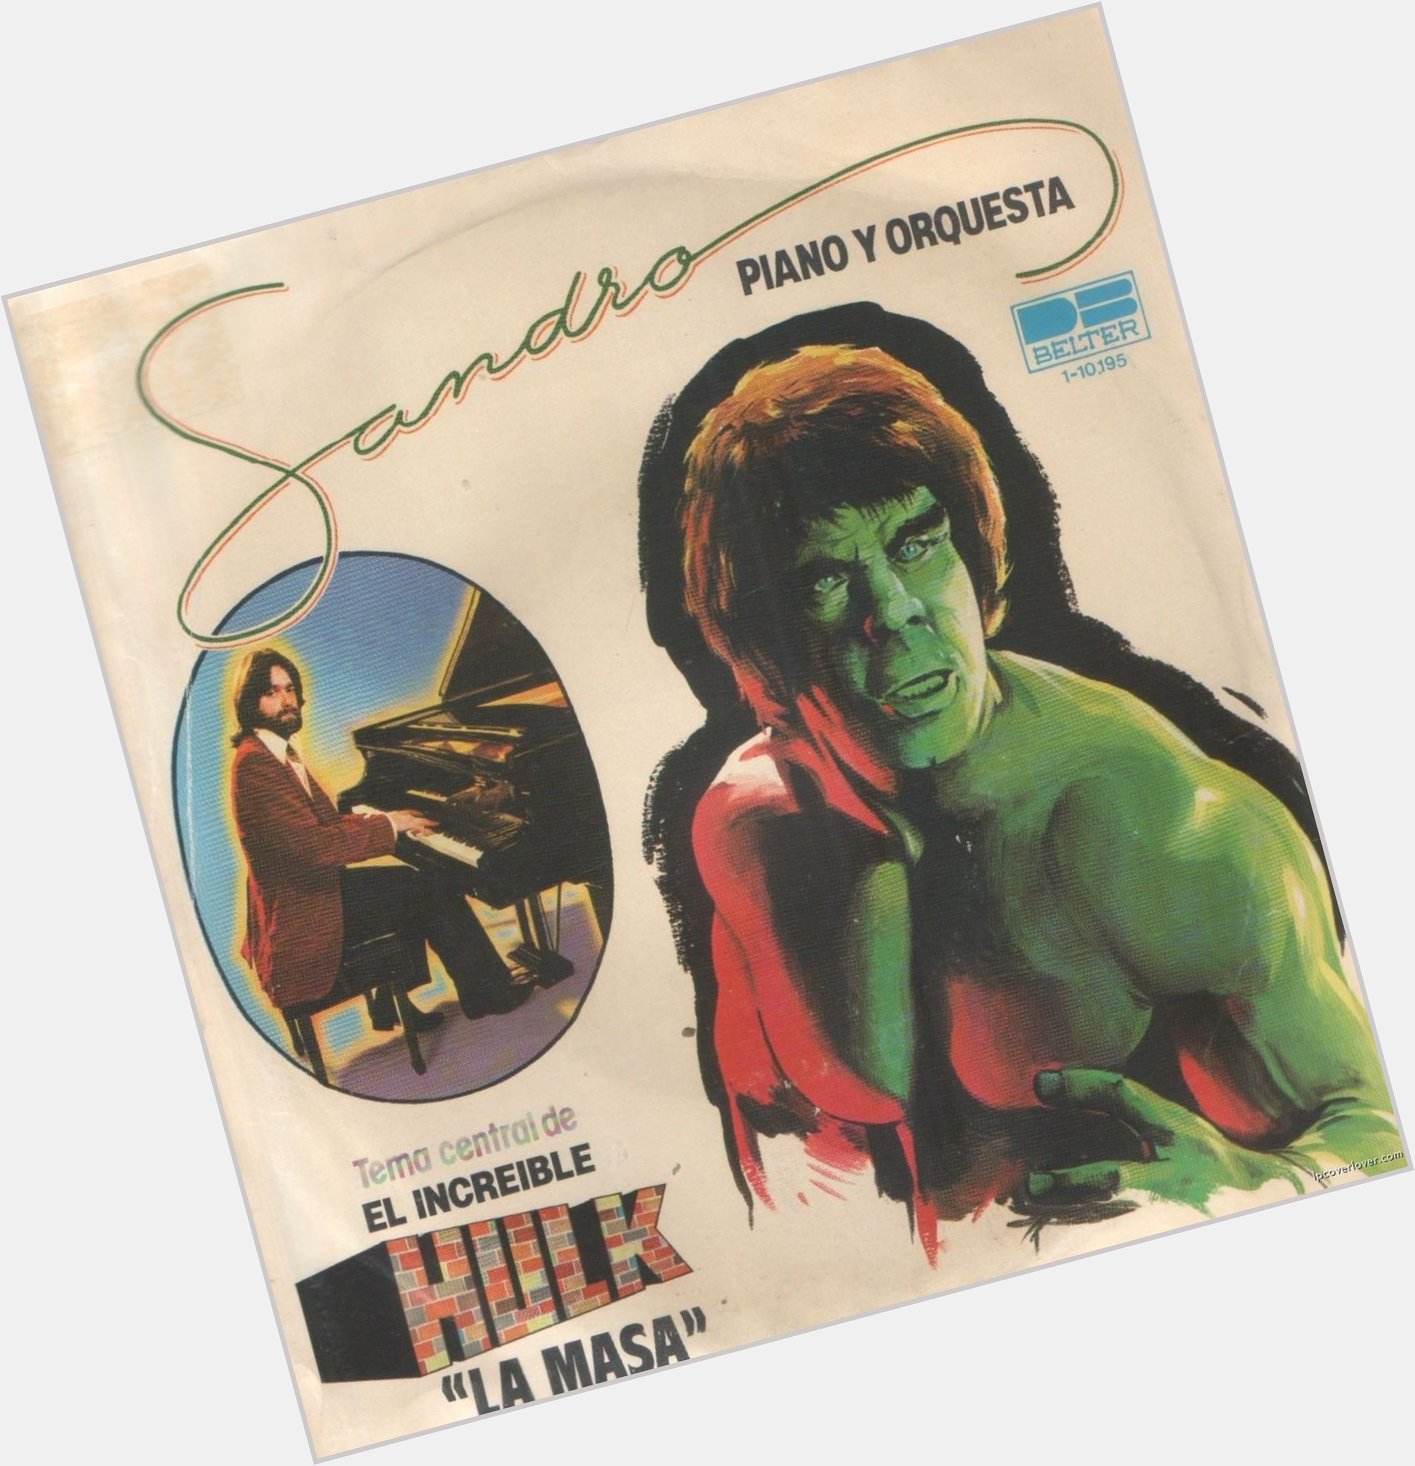 And a very happy birthday to Lou Ferrigno, 68 today!

Here\s his song:  